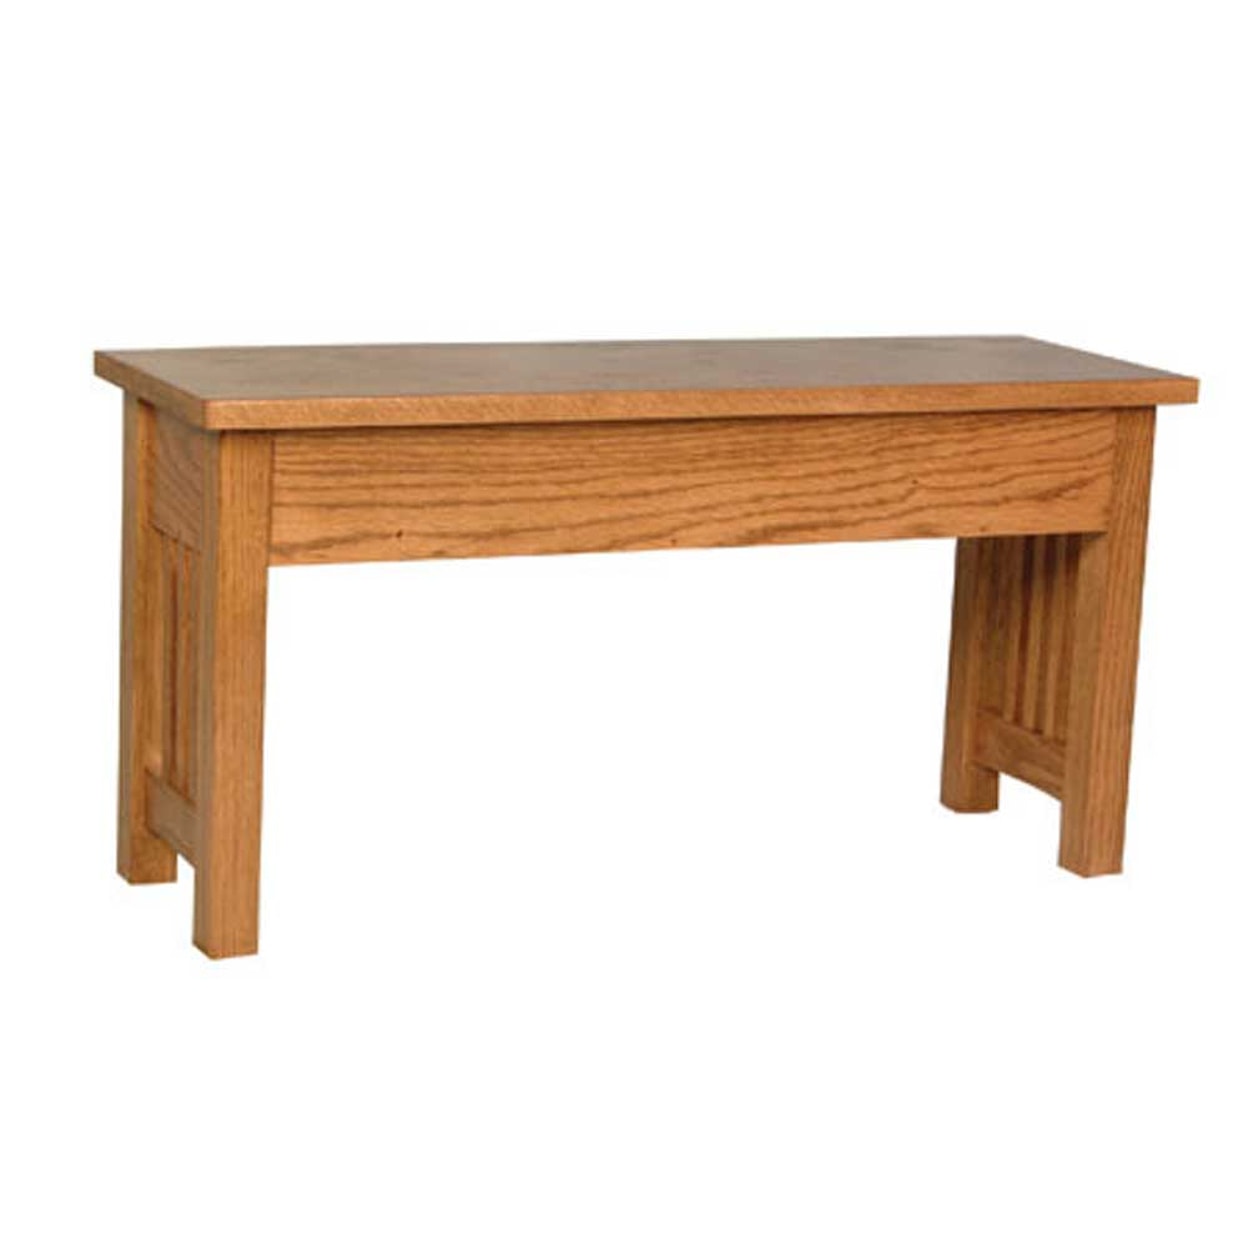 Simply Amish Prairie Mission Hearth Bench